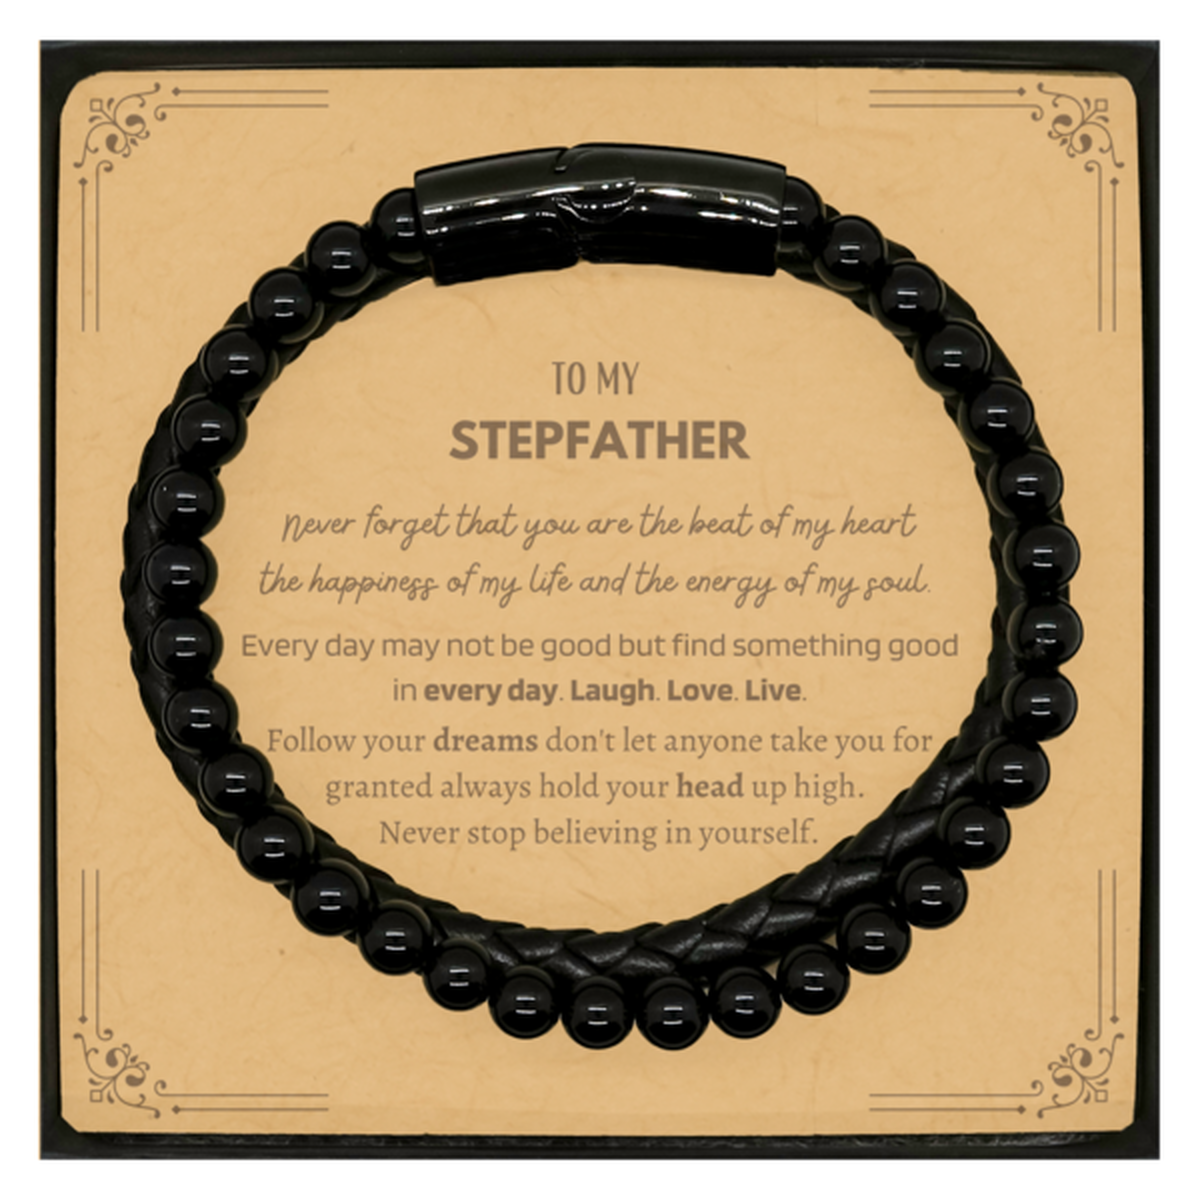 To My Stepfather Message Card Gifts, Christmas Stepfather Stone Leather Bracelets Present, Birthday Unique Motivational For Stepfather, To My Stepfather Never forget that you are the beat of my heart the happiness of my life and the energy of my soul